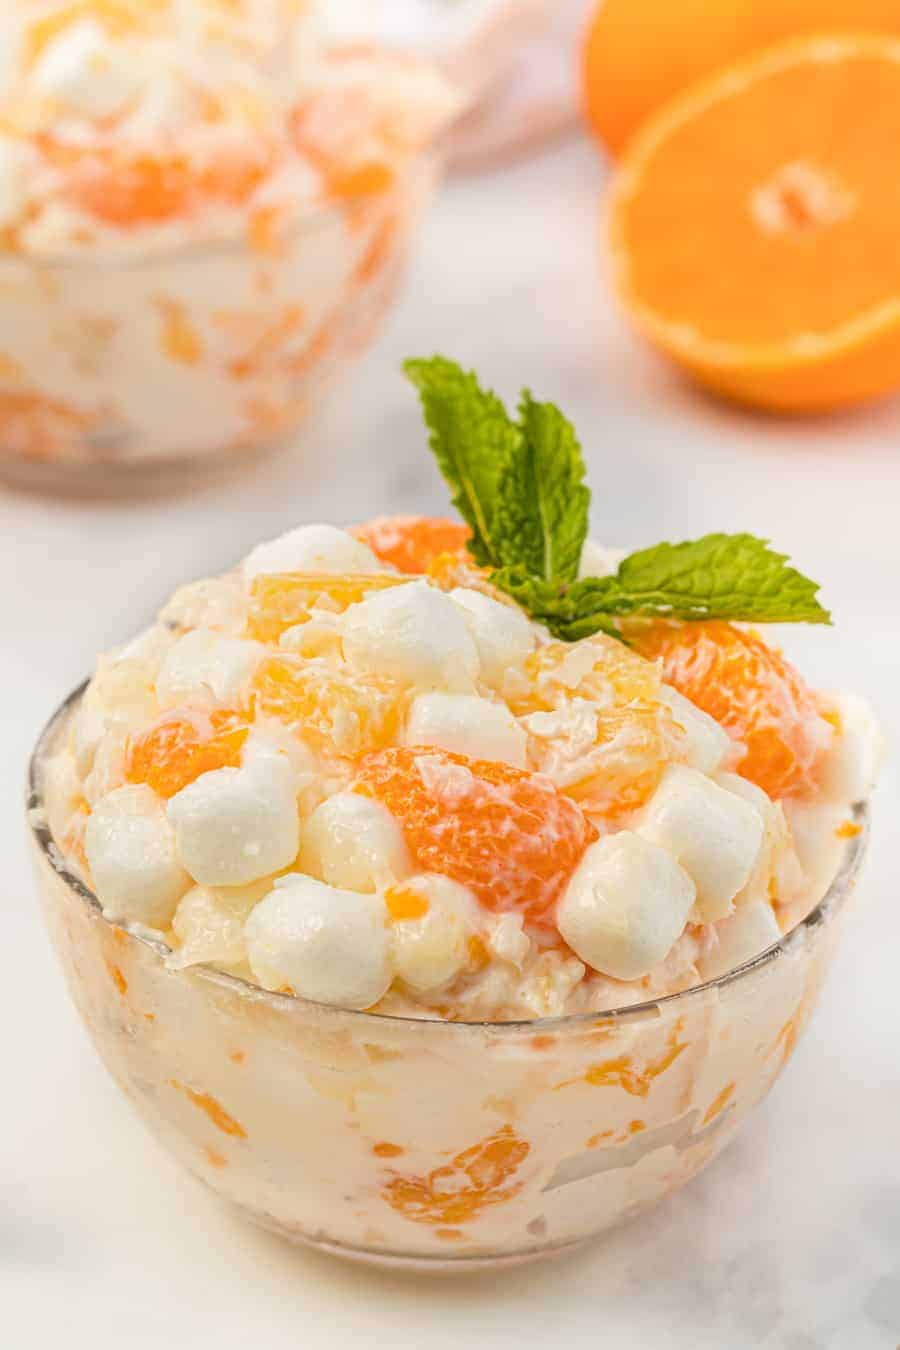 This tasty and creamy 6-cup ambrosia fruit salad is the simplest thing to make and is forever a hit for kiddos and adults alike at any gathering! 